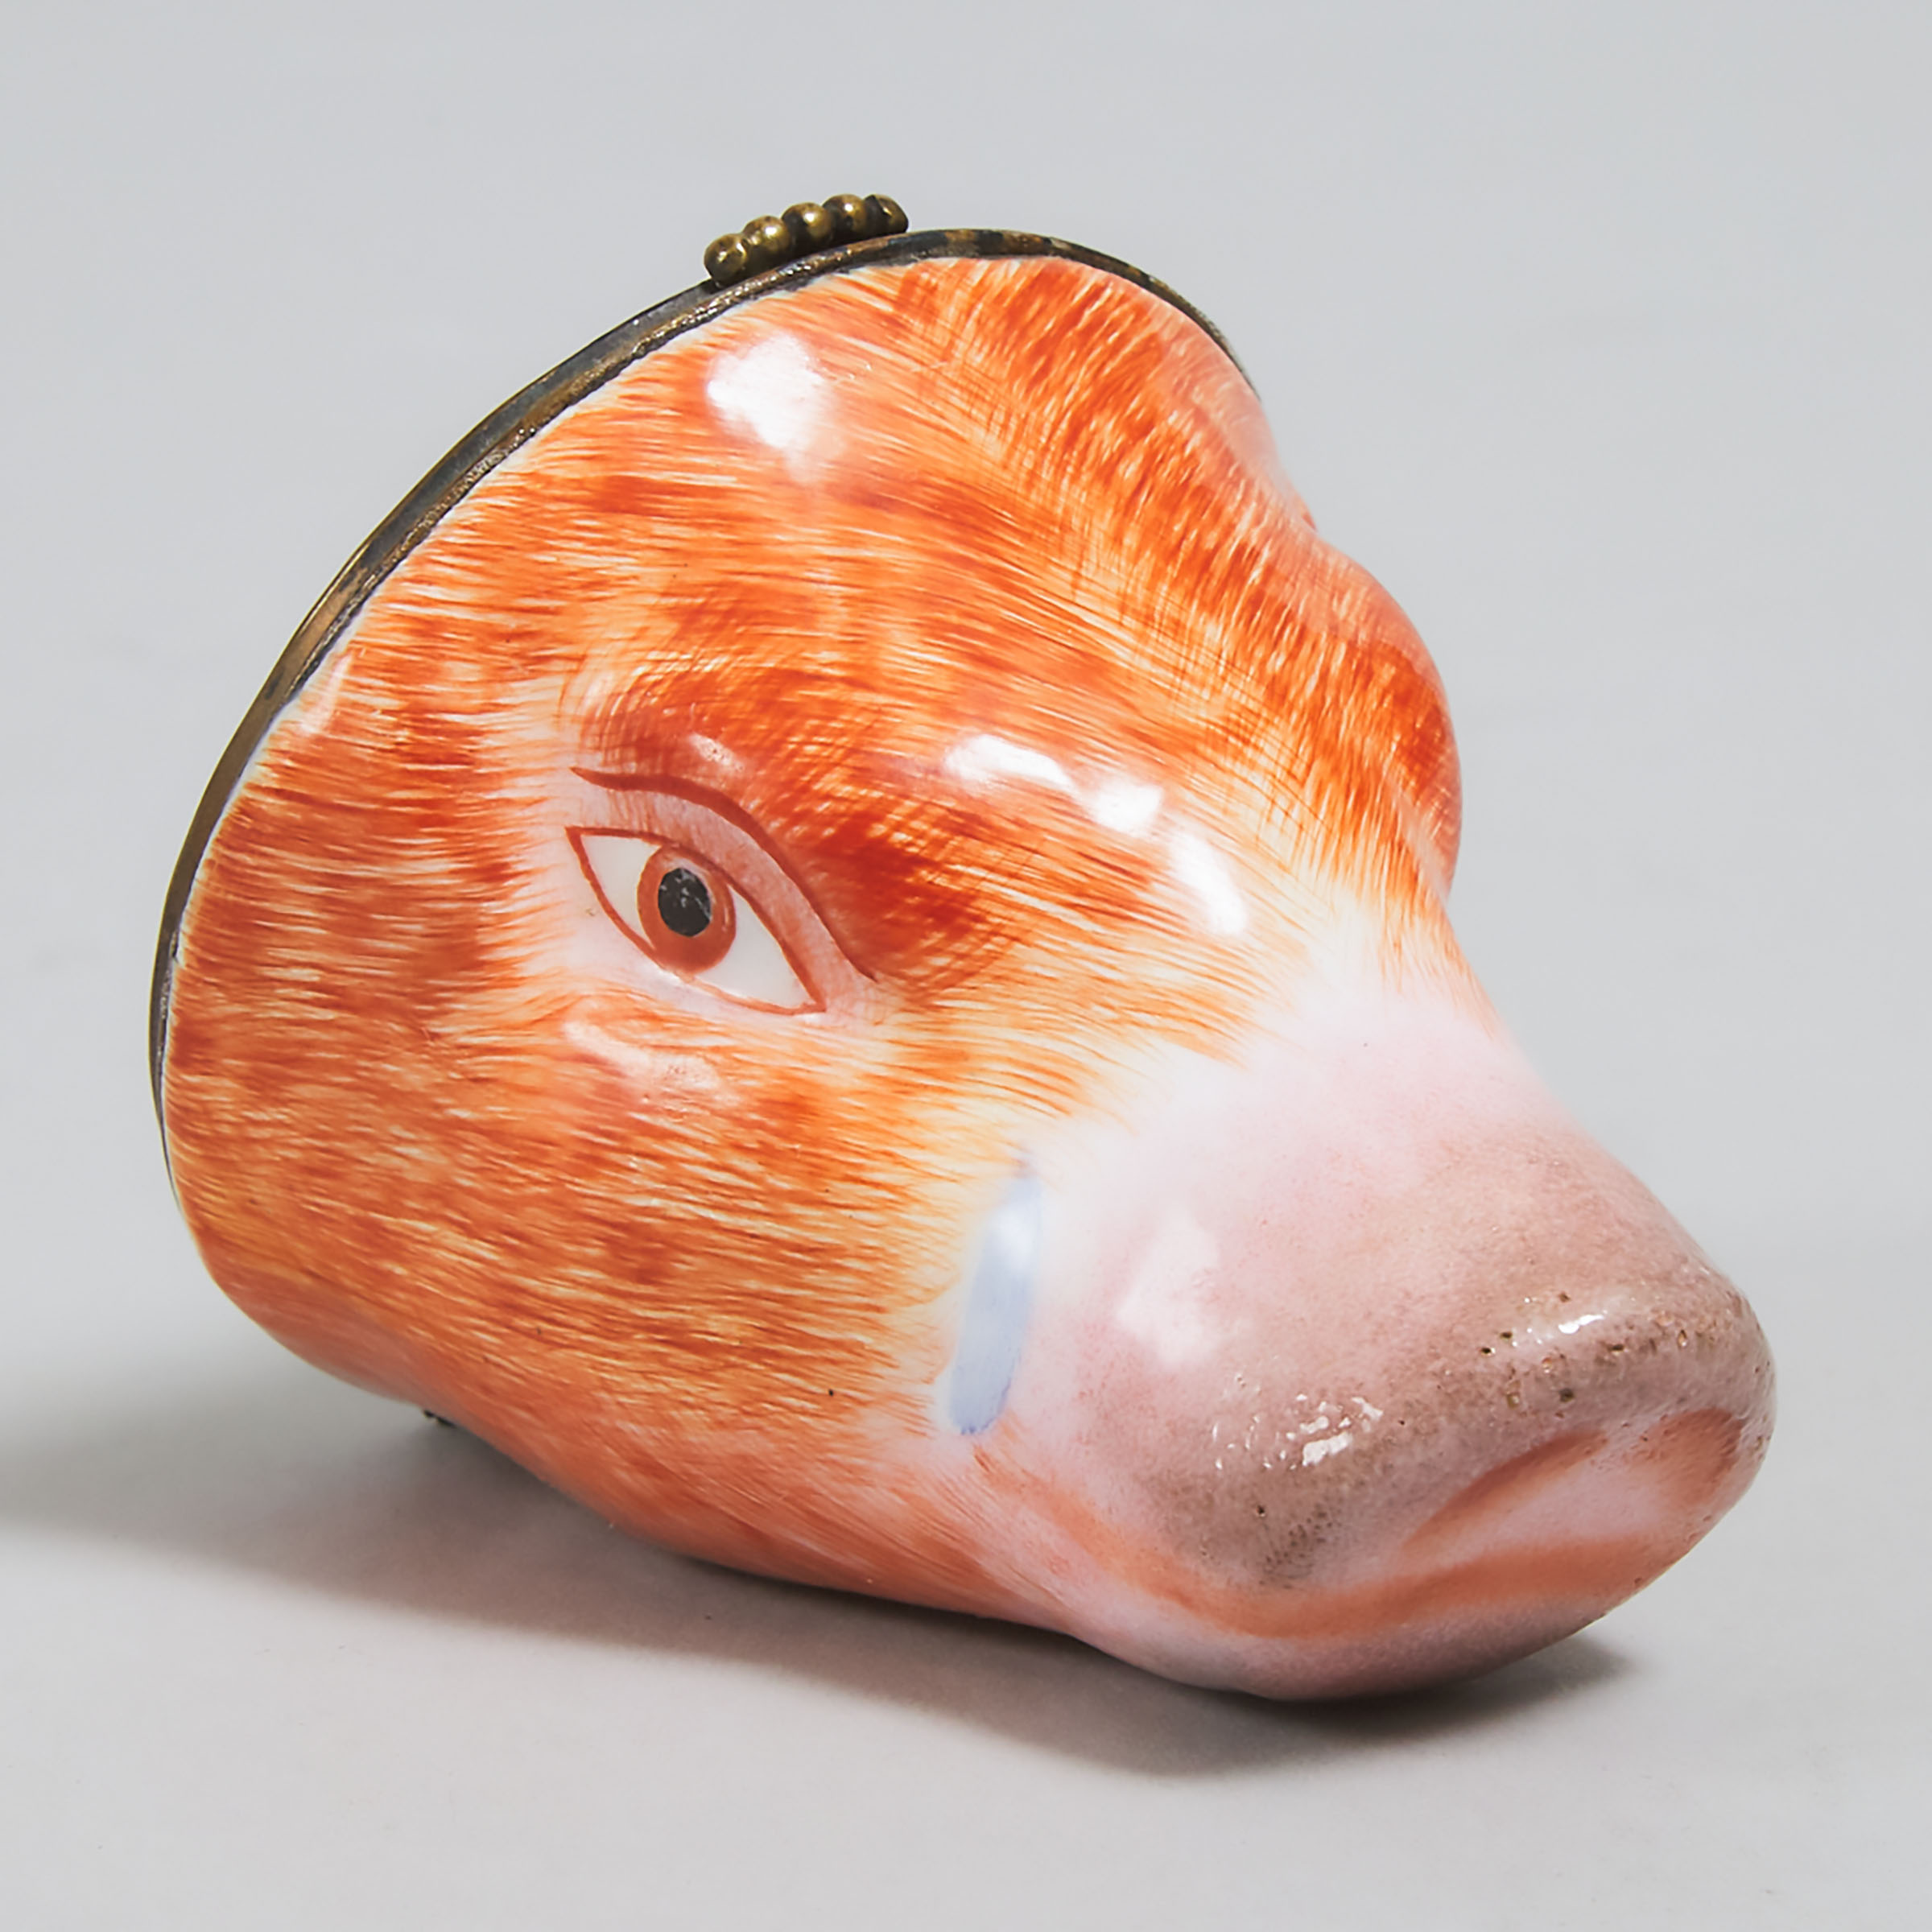 English Enamelled Copper Boar's Head Form Covered Stirrup Cup, 19th century